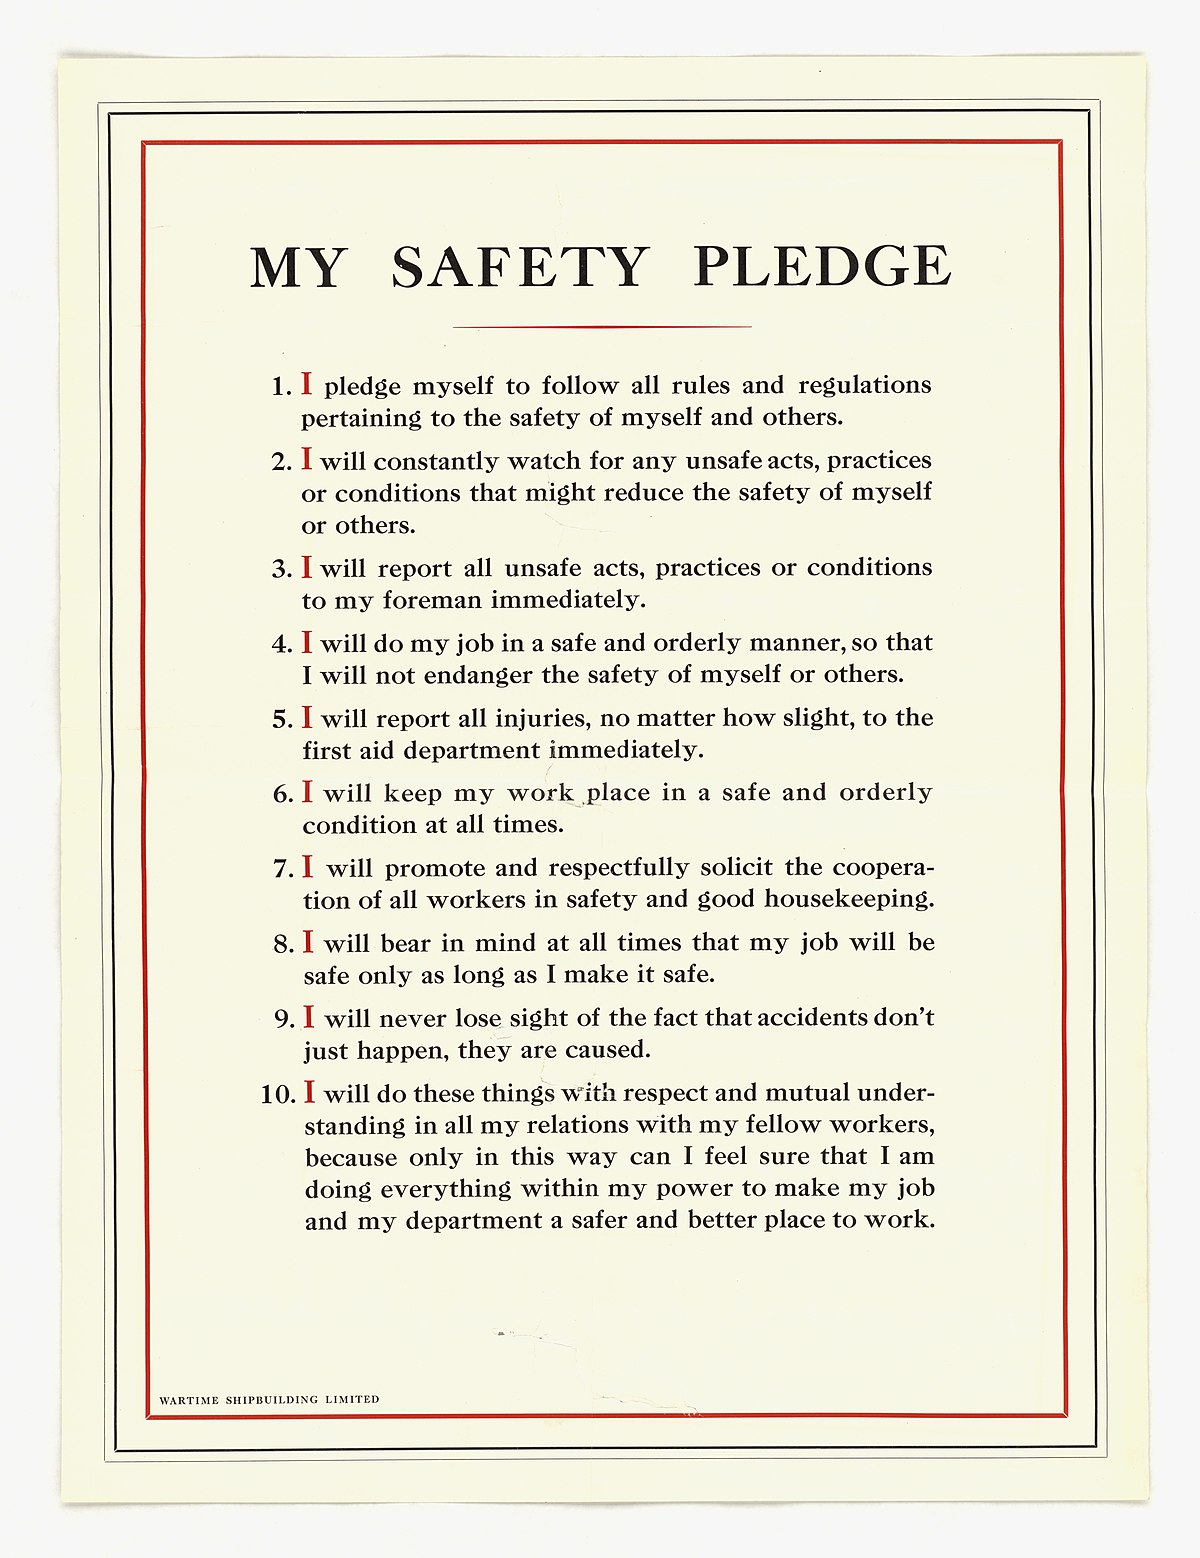 angelo serino recommends college rules the pledge pic